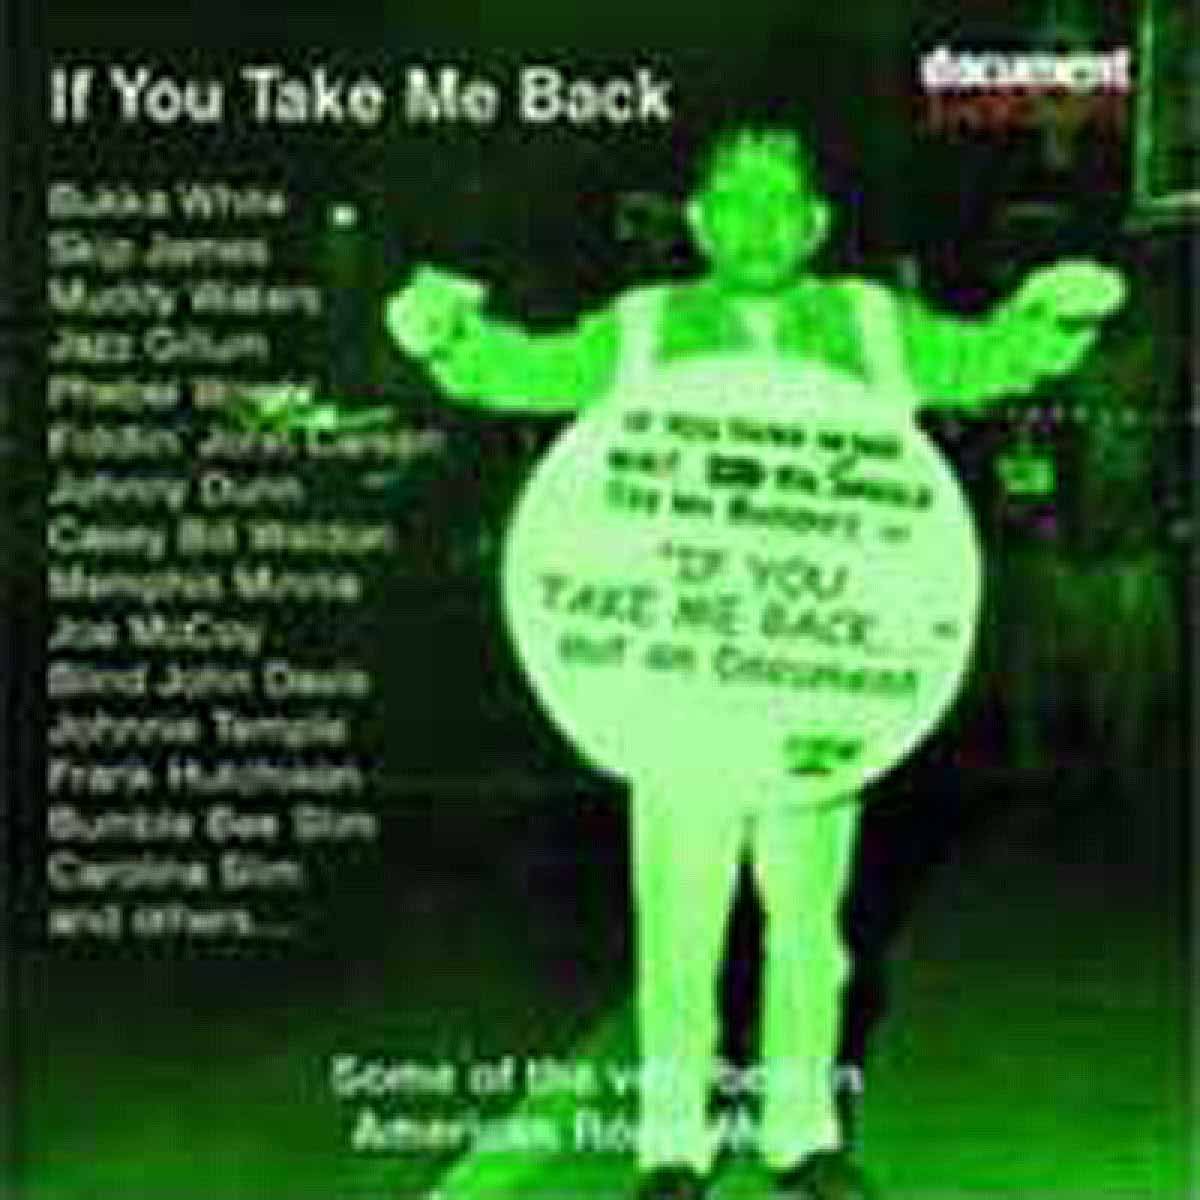 CD Shop - V/A IF YOU TAKE ME BACK: SOME OF THE VERY BEST IN AMERICAN ROOTS MUSIC